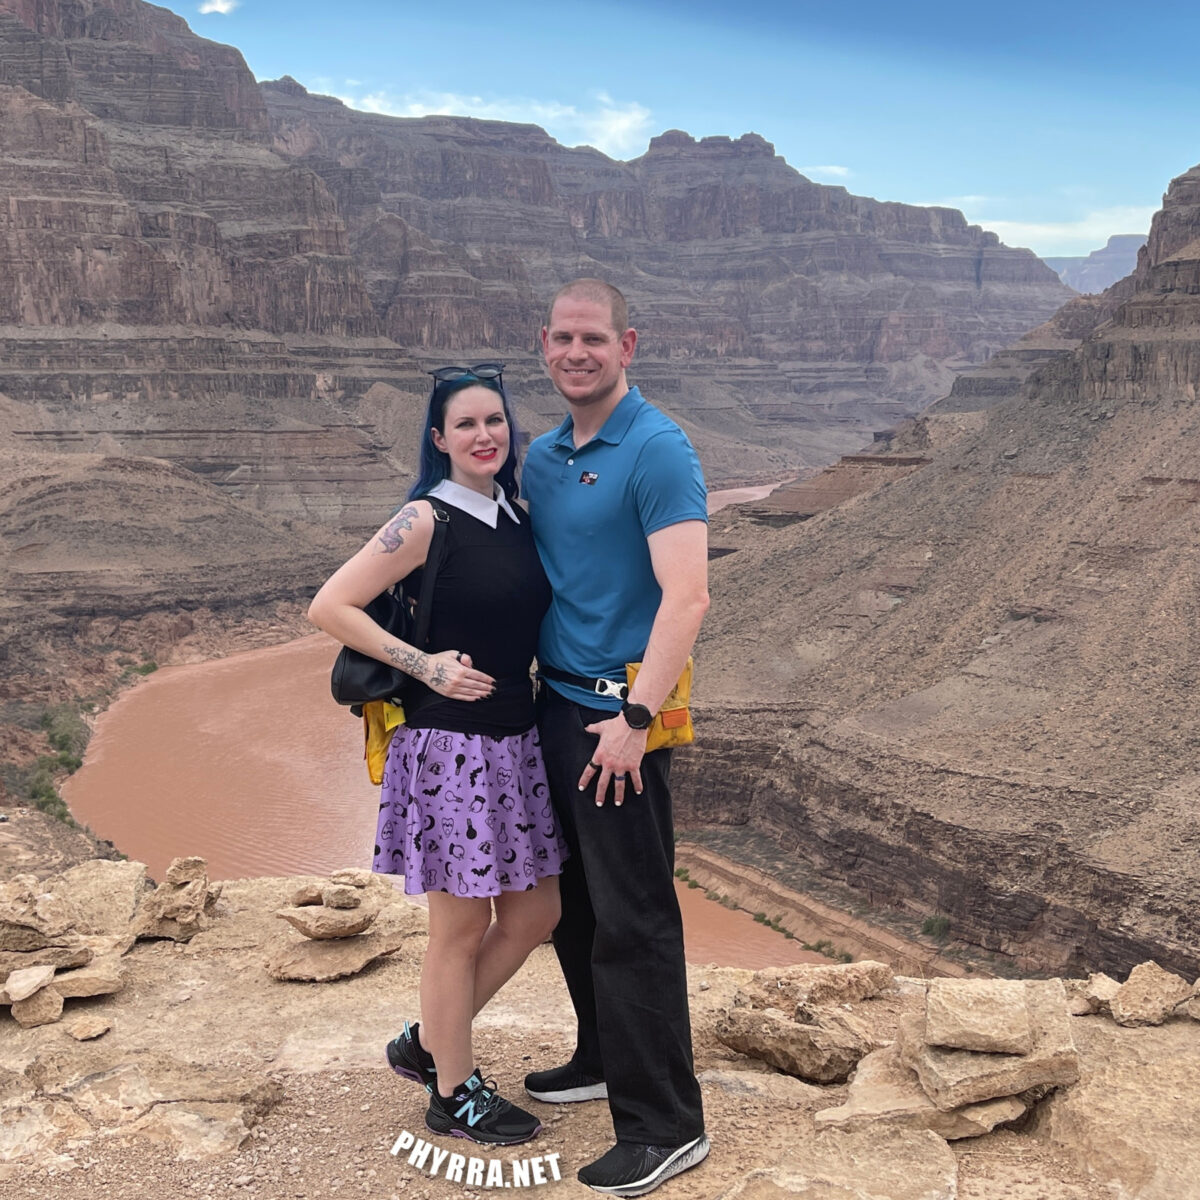 Dave and Cordelia in front of the Grand Canyon